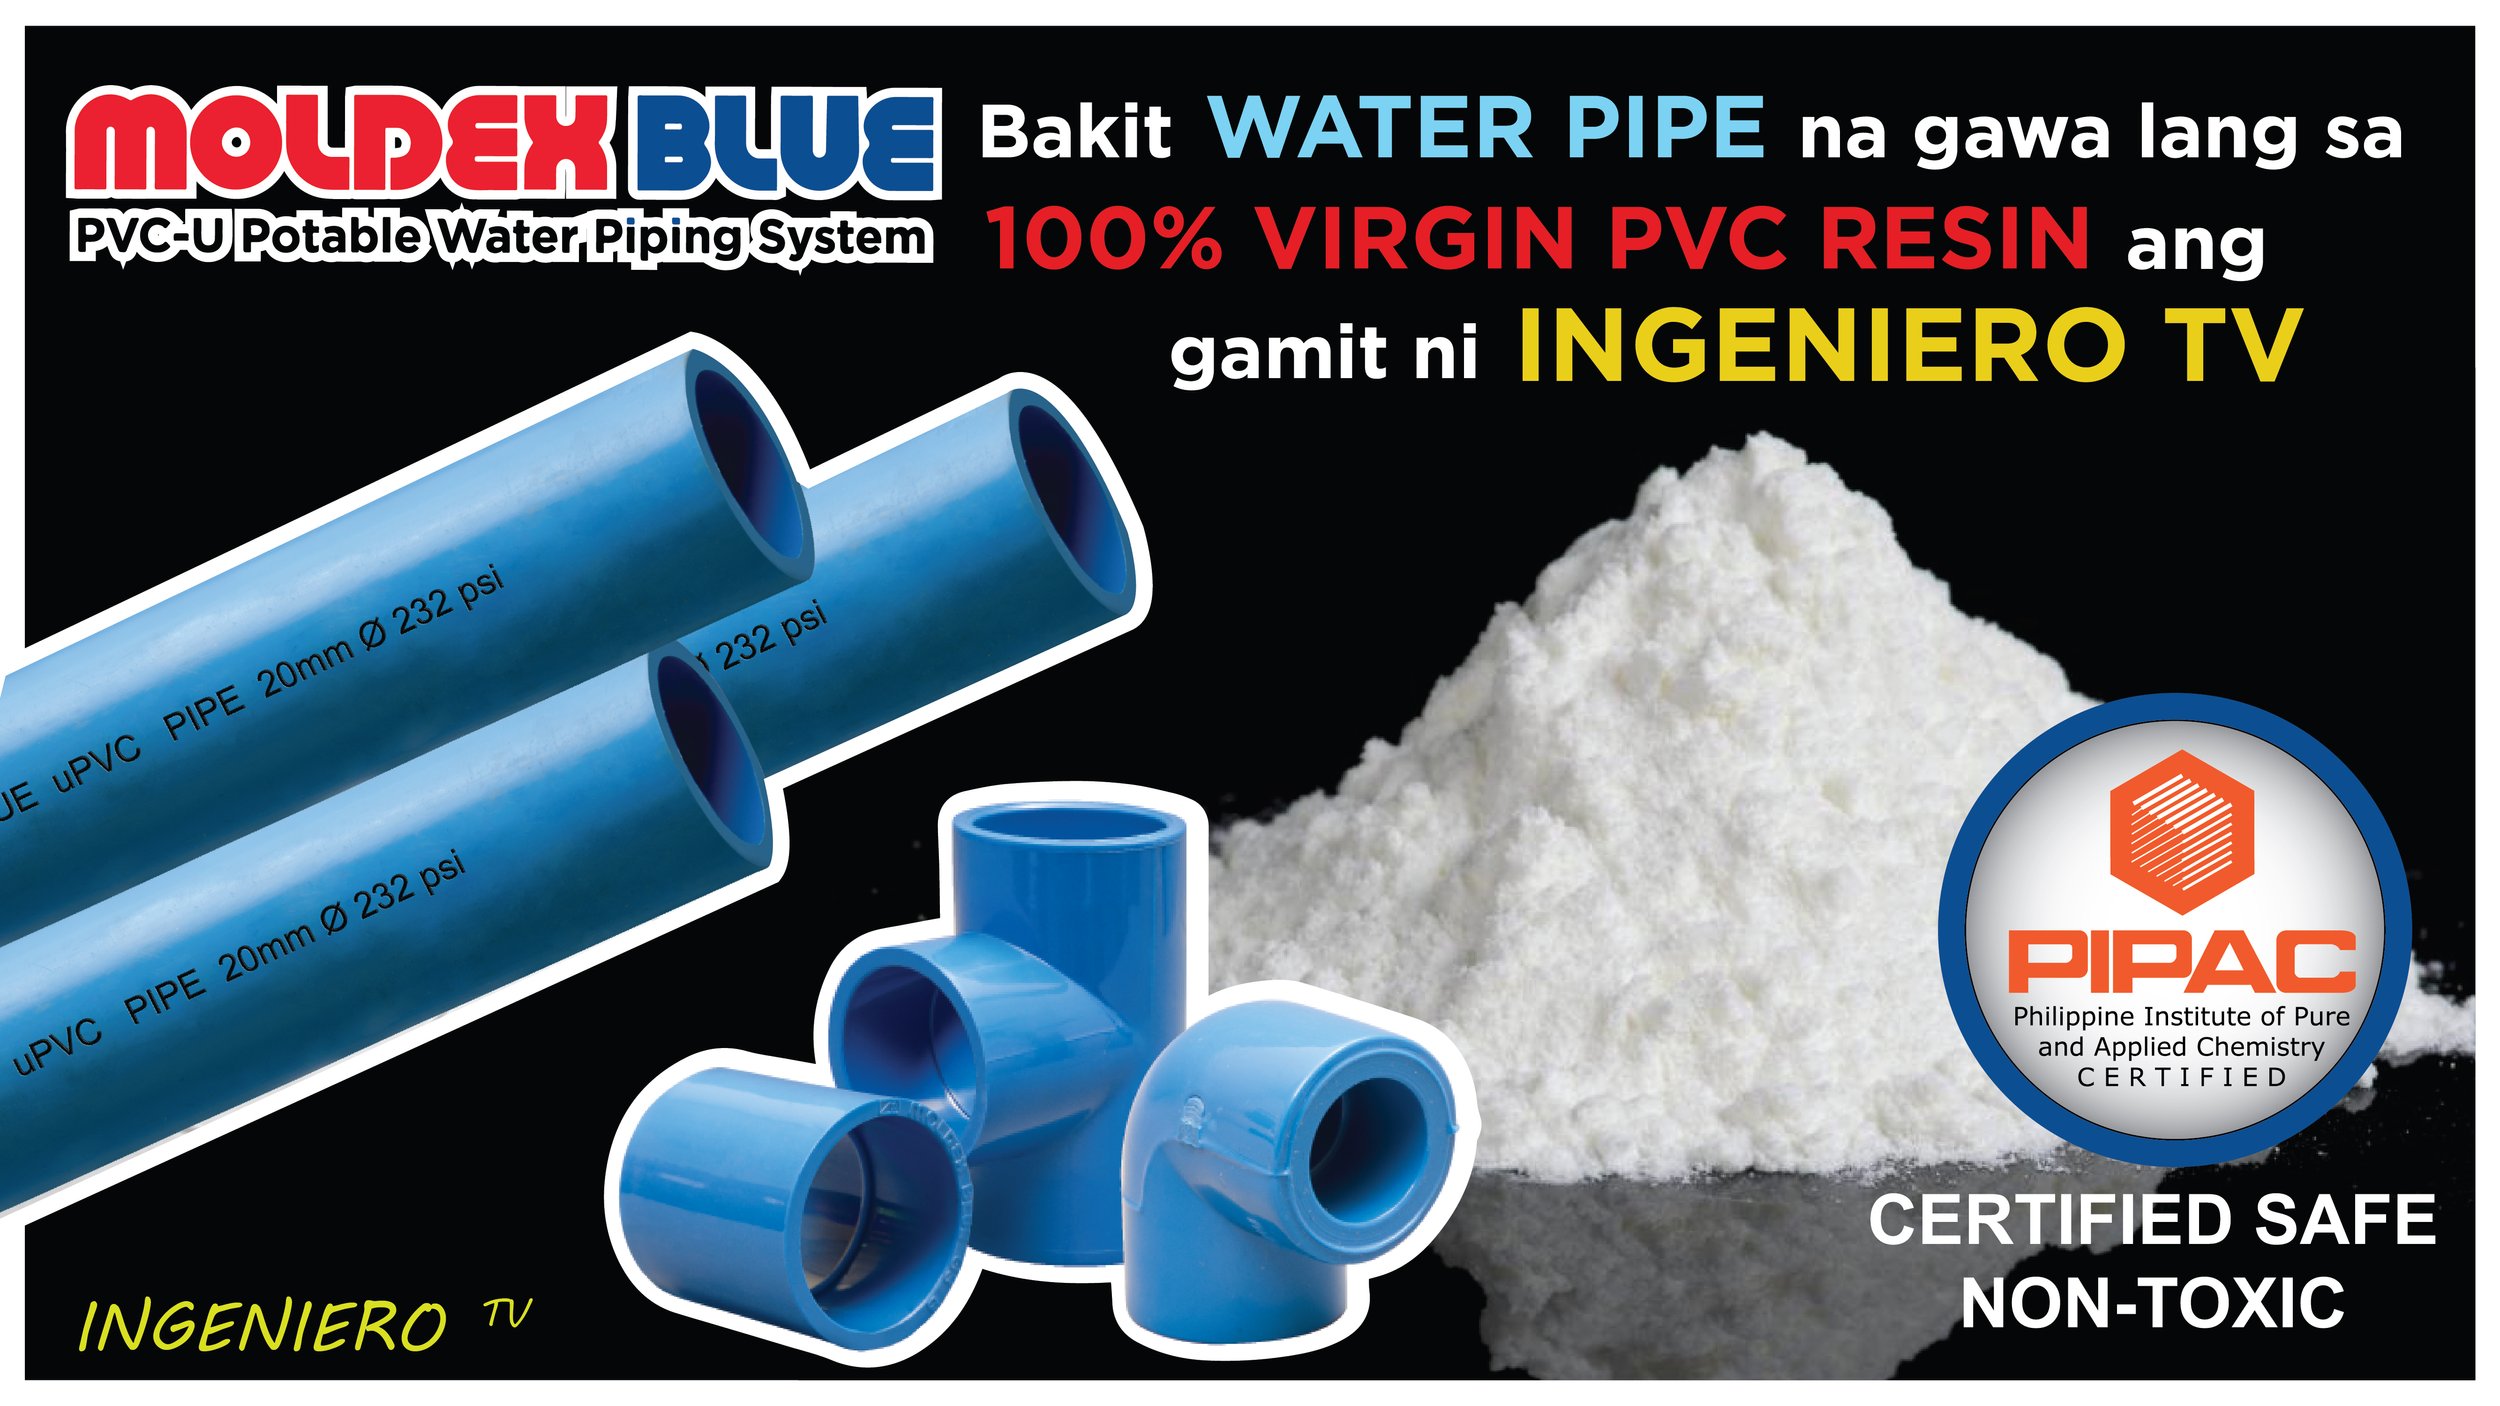 MOLDEX Blue Potable PVC Pipes and Fittings